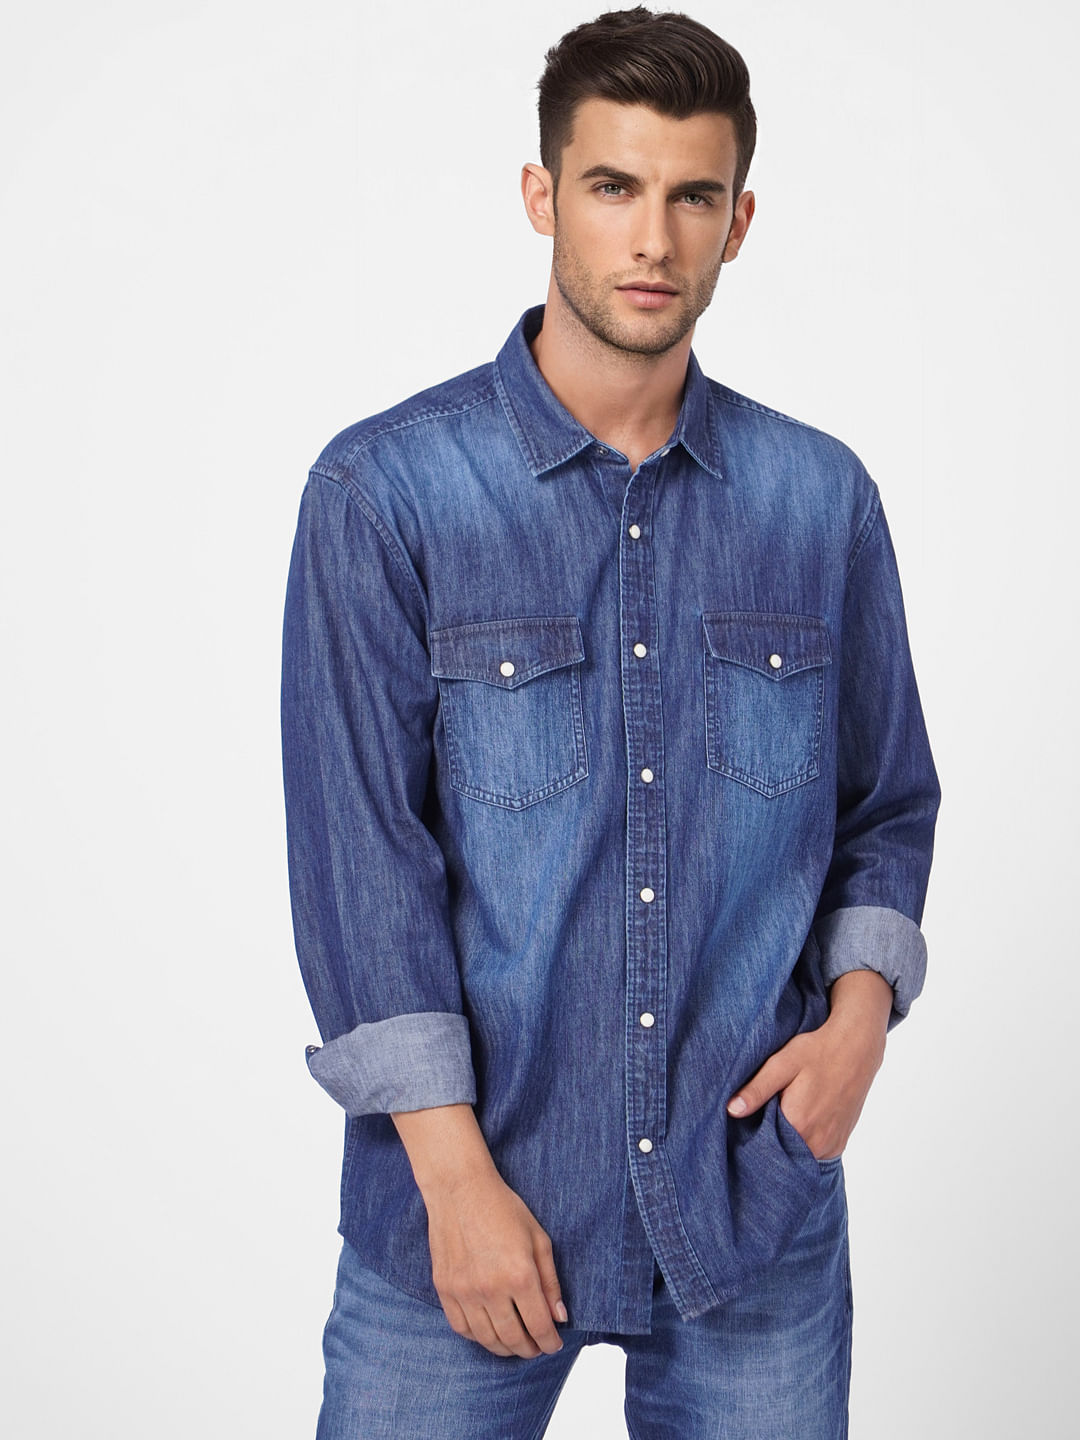 2017 Brand Long Sleeve Washed Blue Denim Shirts Men Casual Slim Fit Man  Cowboy Jean Shirt Cotton Camisa Masculina Chemise Homme : Amazon.in:  Clothing & Accessories